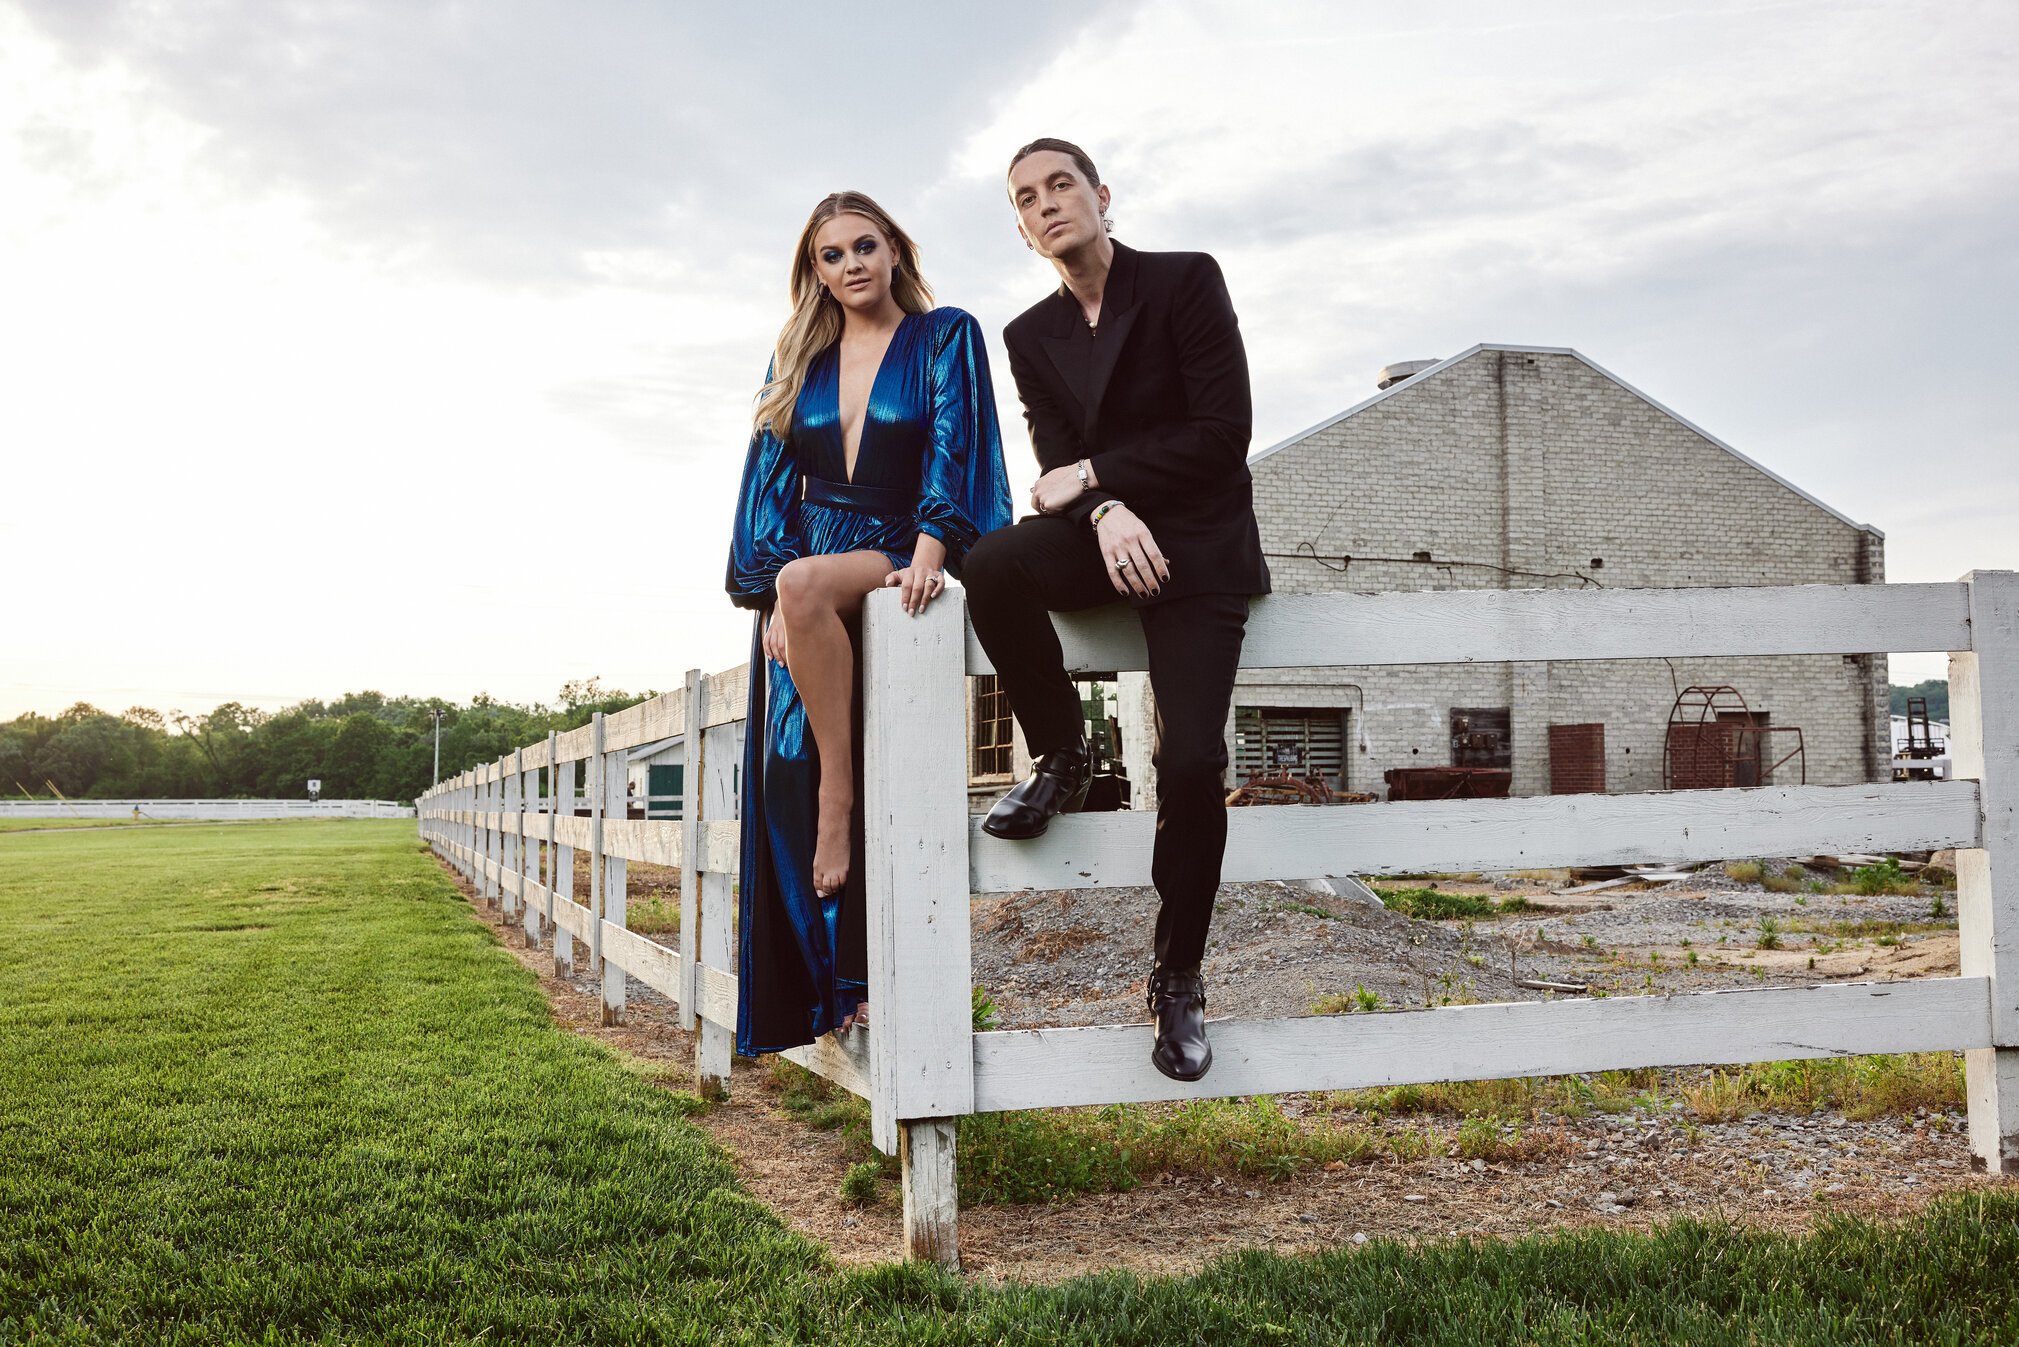 Kelsea Ballerini and Paul Klein of 'I Quit Drinking' sit on a white fence.